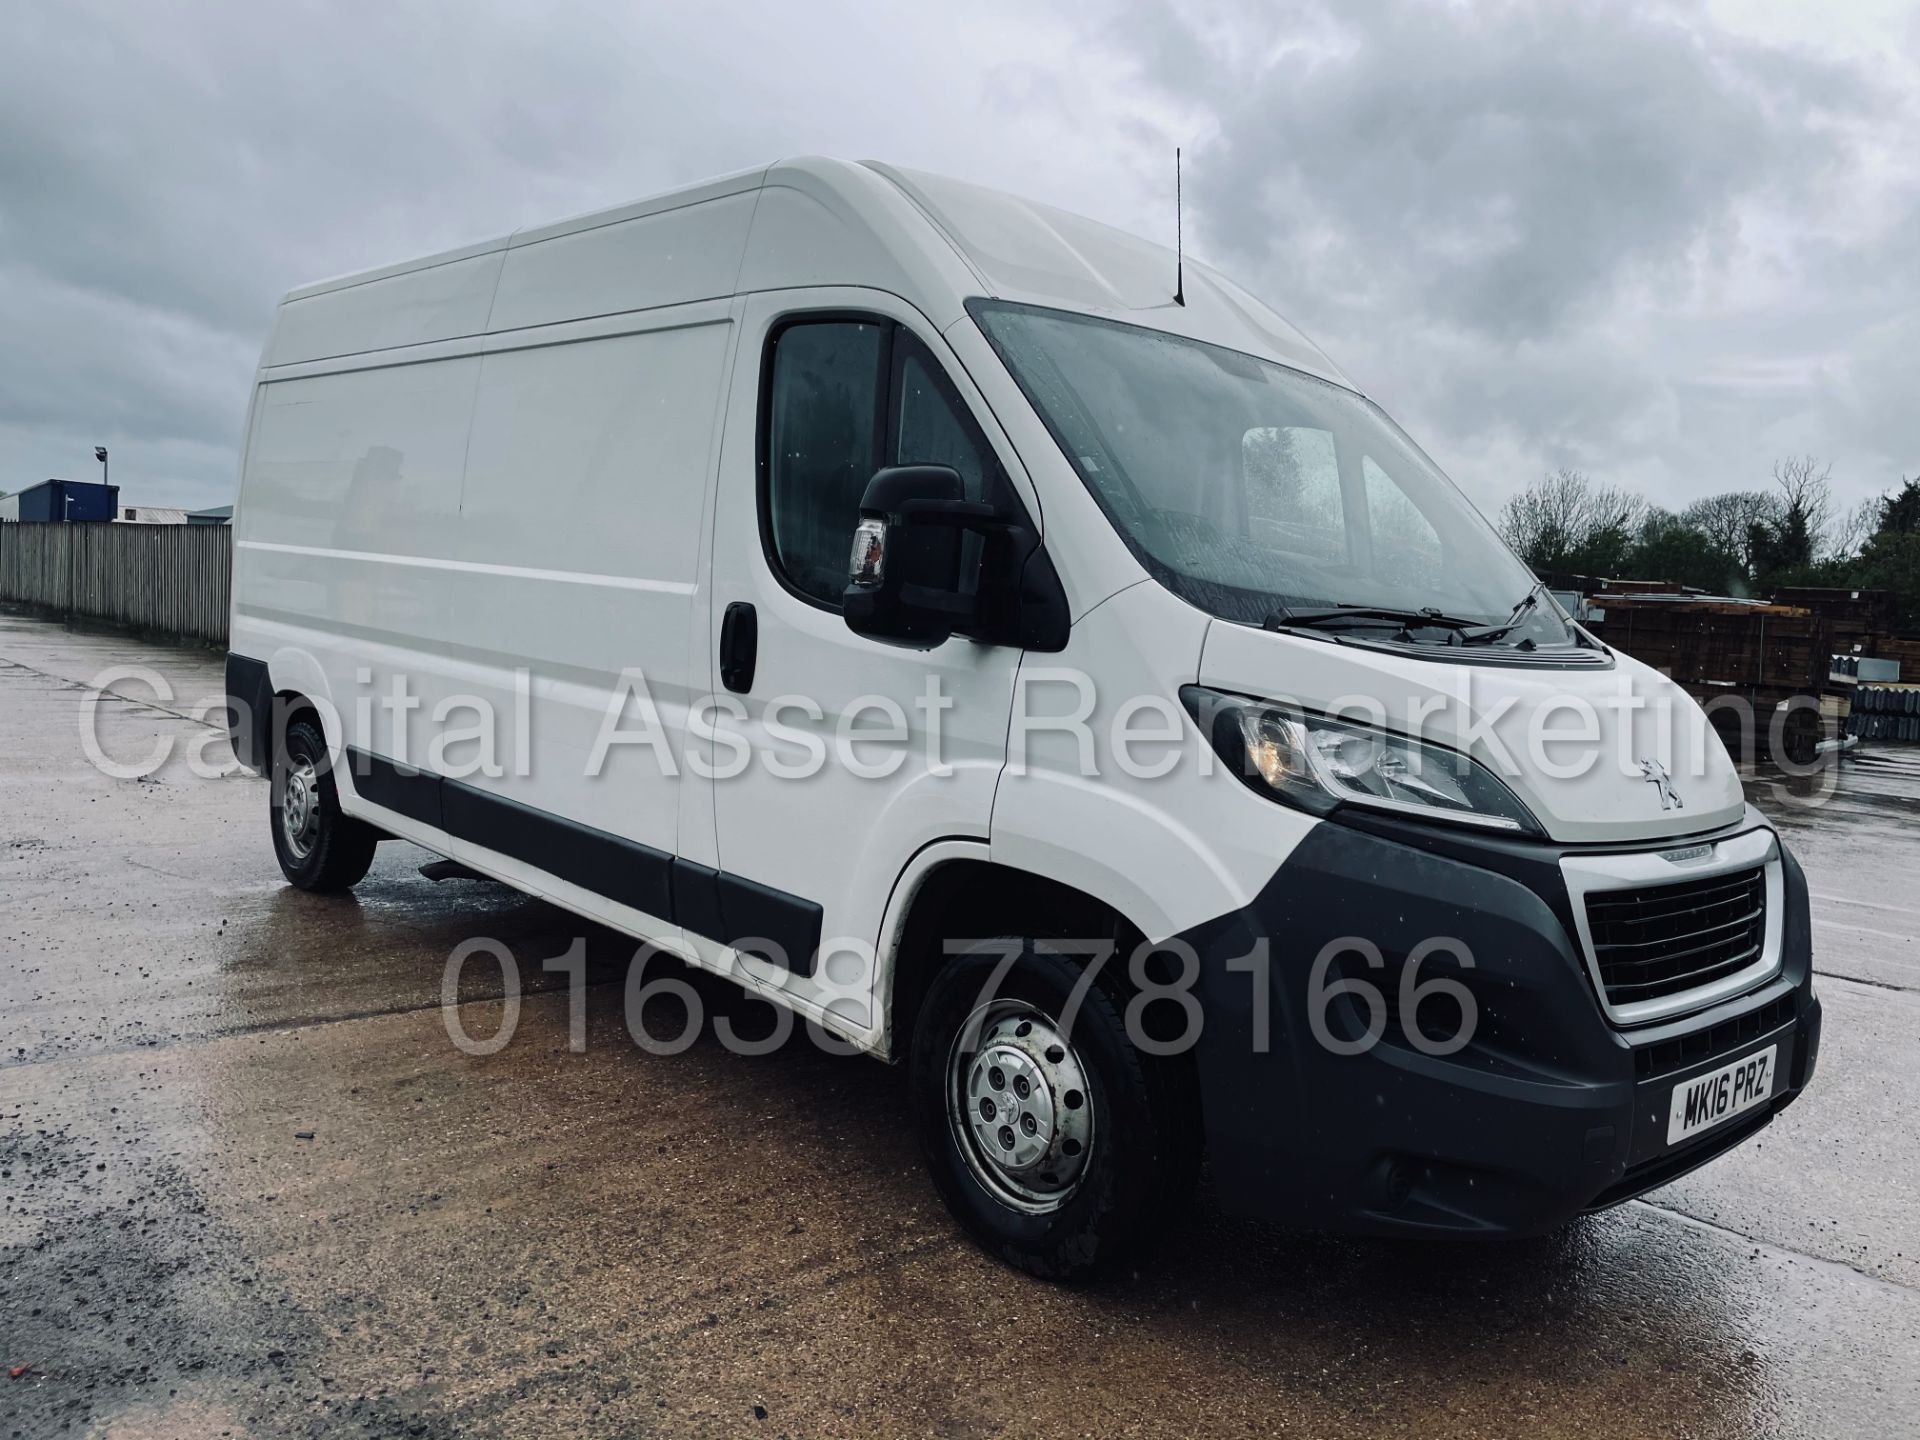 PEUGEOT BOXER 335 *PROFESSIONAL* LWB HI-ROOF (2016) '2.2 HDI - 130 BHP - 6 SPEED' *A/C* (1 OWNER) - Image 3 of 41